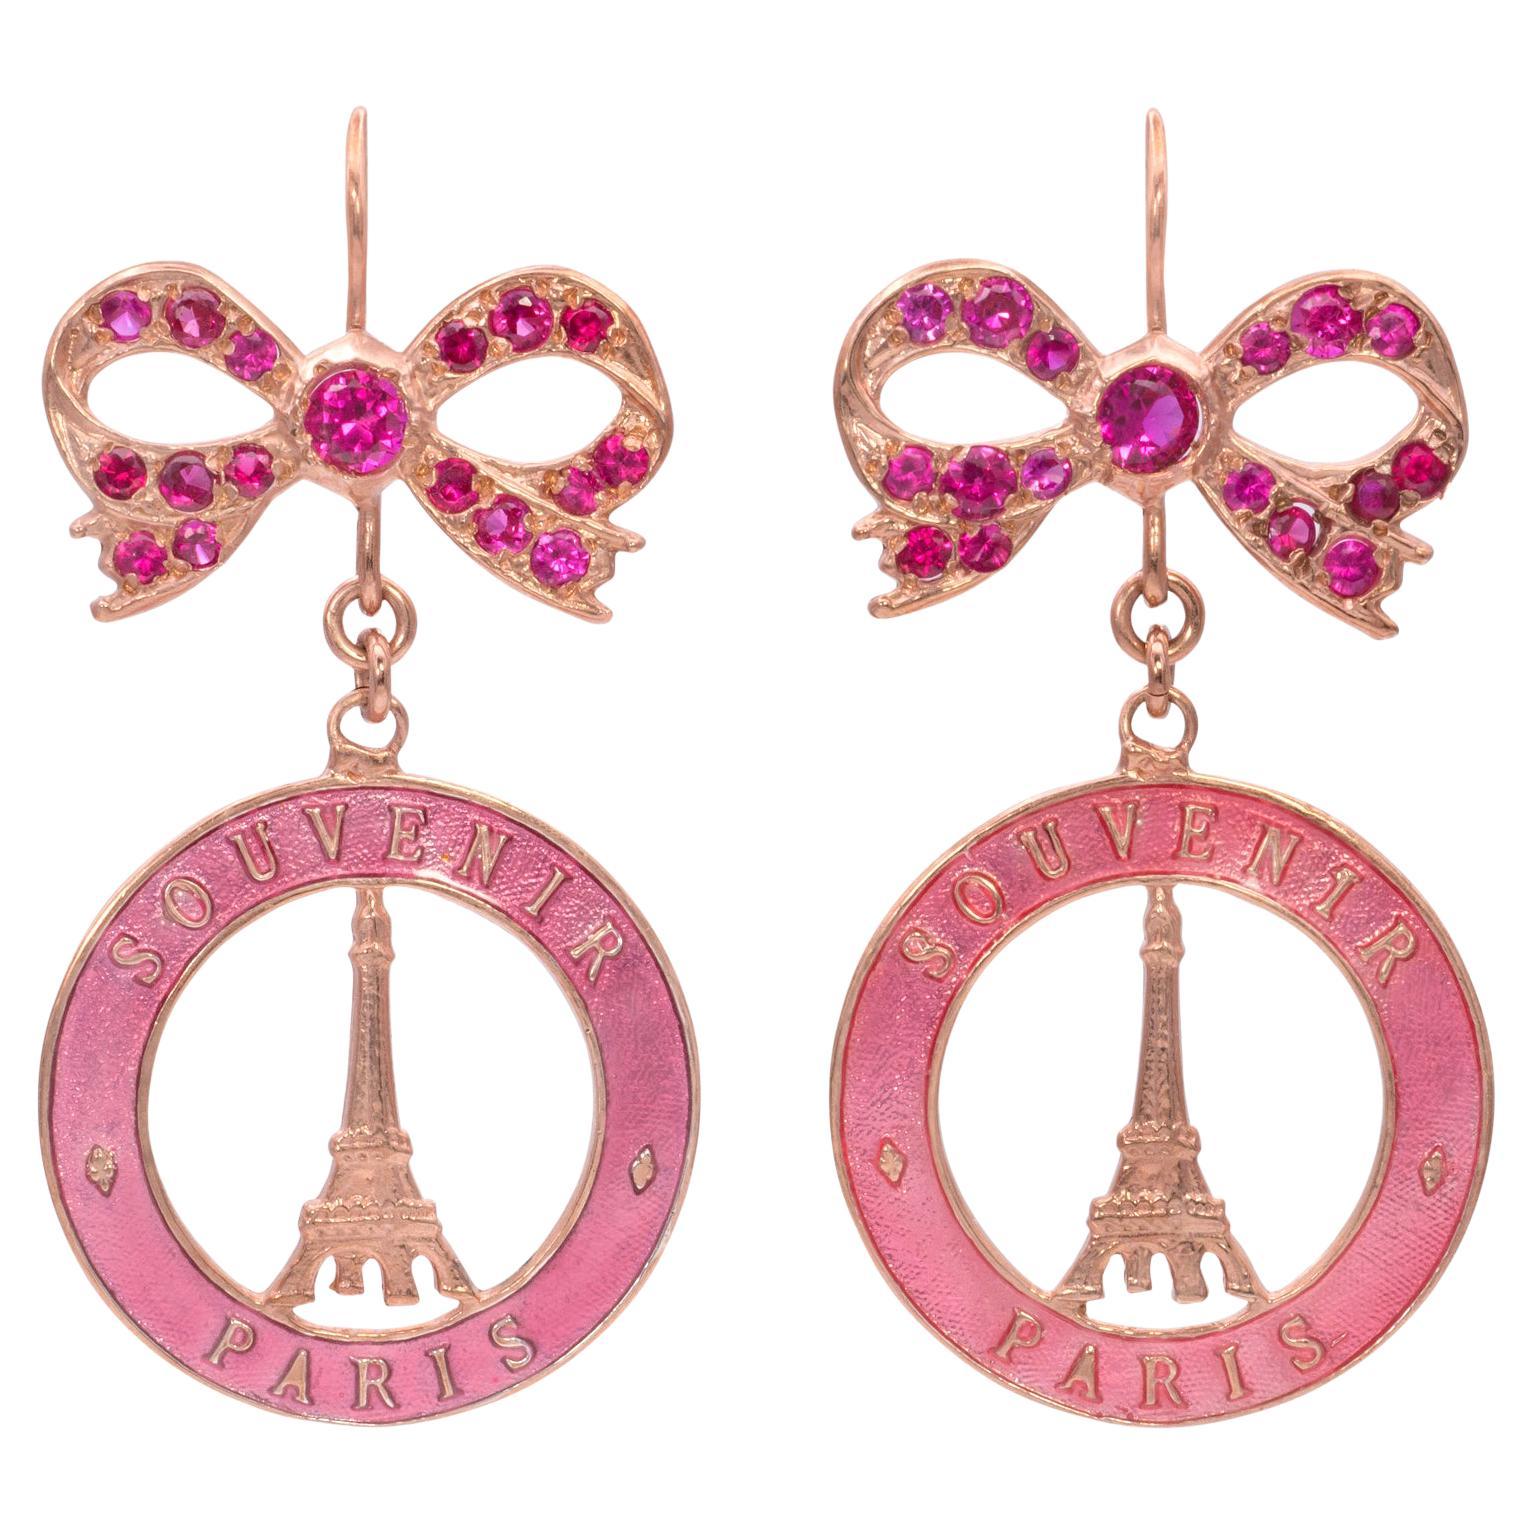 Souvenir de Paris Earrings with Swarovski Crystal bows. Dreaming of being in Paris, the city of love? These charming earrings will take you there the moment you put them on. Blue hand painted enamel on sterling silver the earring measures 1.15